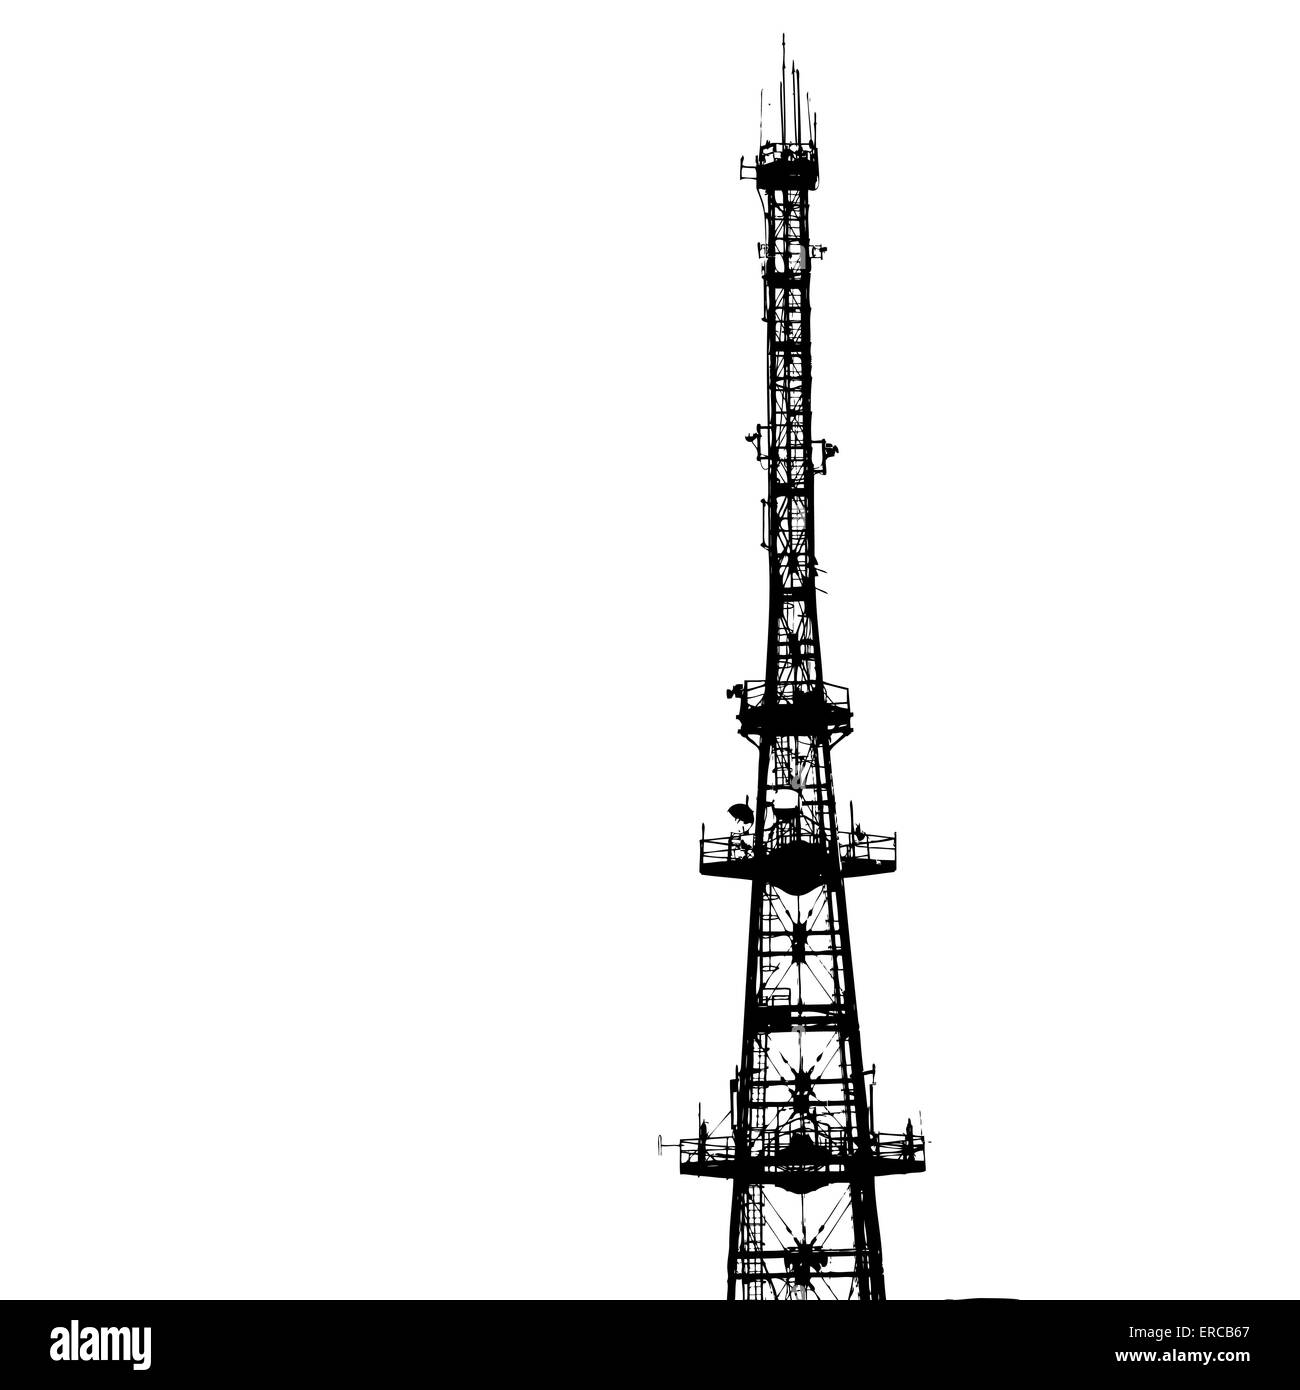 communications tower for tv and mobile phone signals. Stock Photo